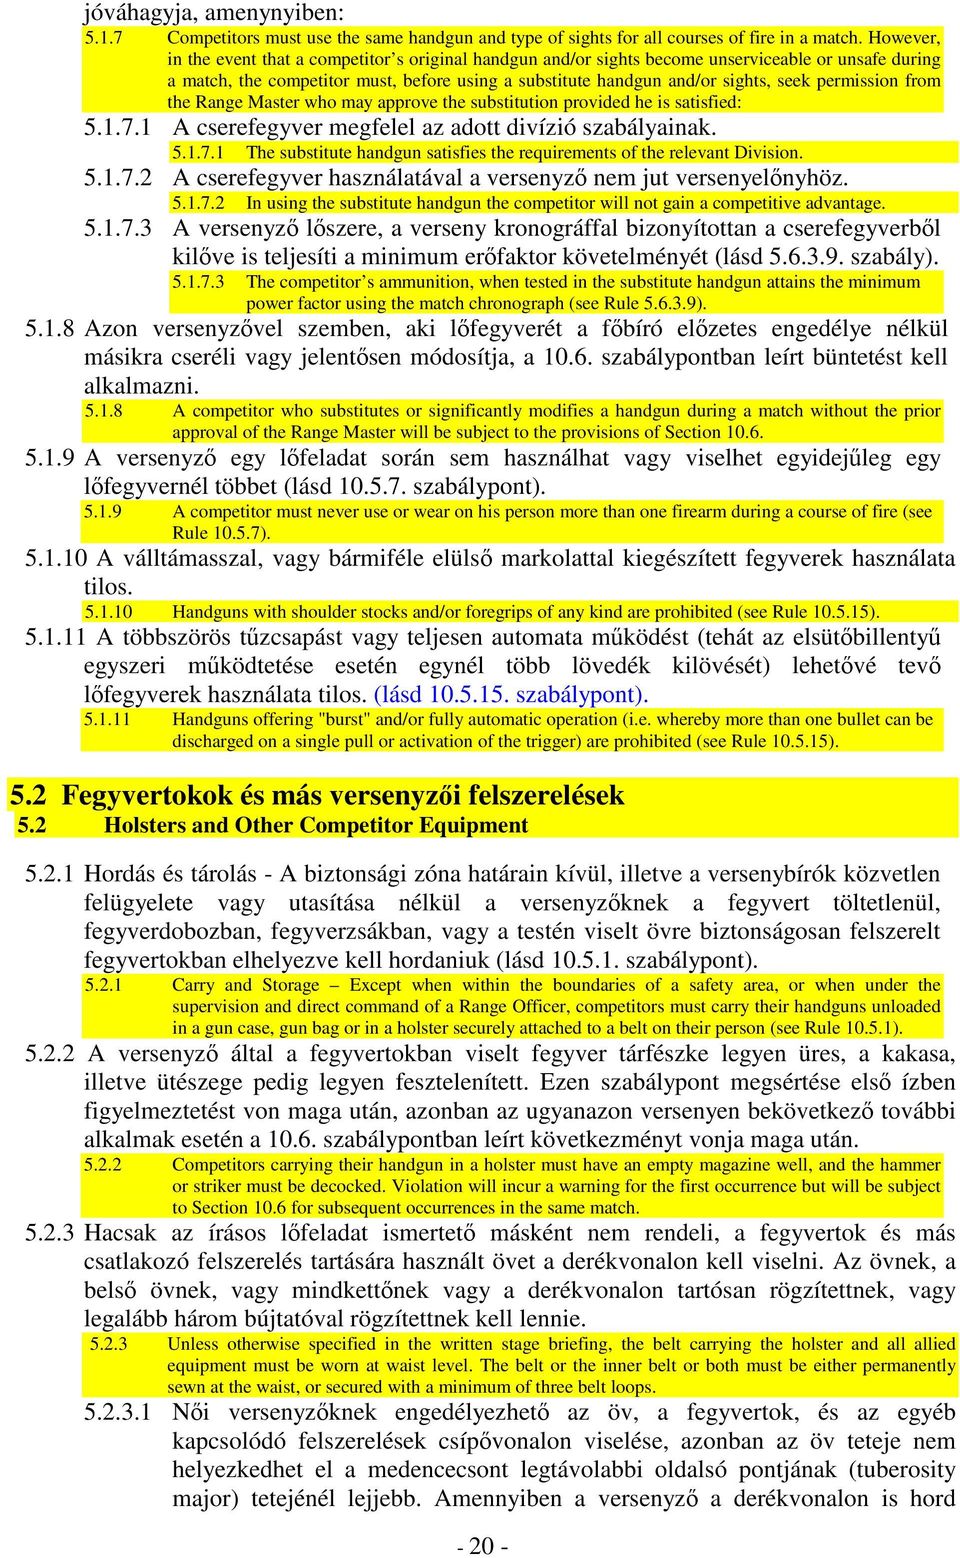 permission from the Range Master who may approve the substitution provided he is satisfied: 5.1.7.1 A cserefegyver megfelel az adott divízió szabályainak. 5.1.7.1 The substitute handgun satisfies the requirements of the relevant Division.